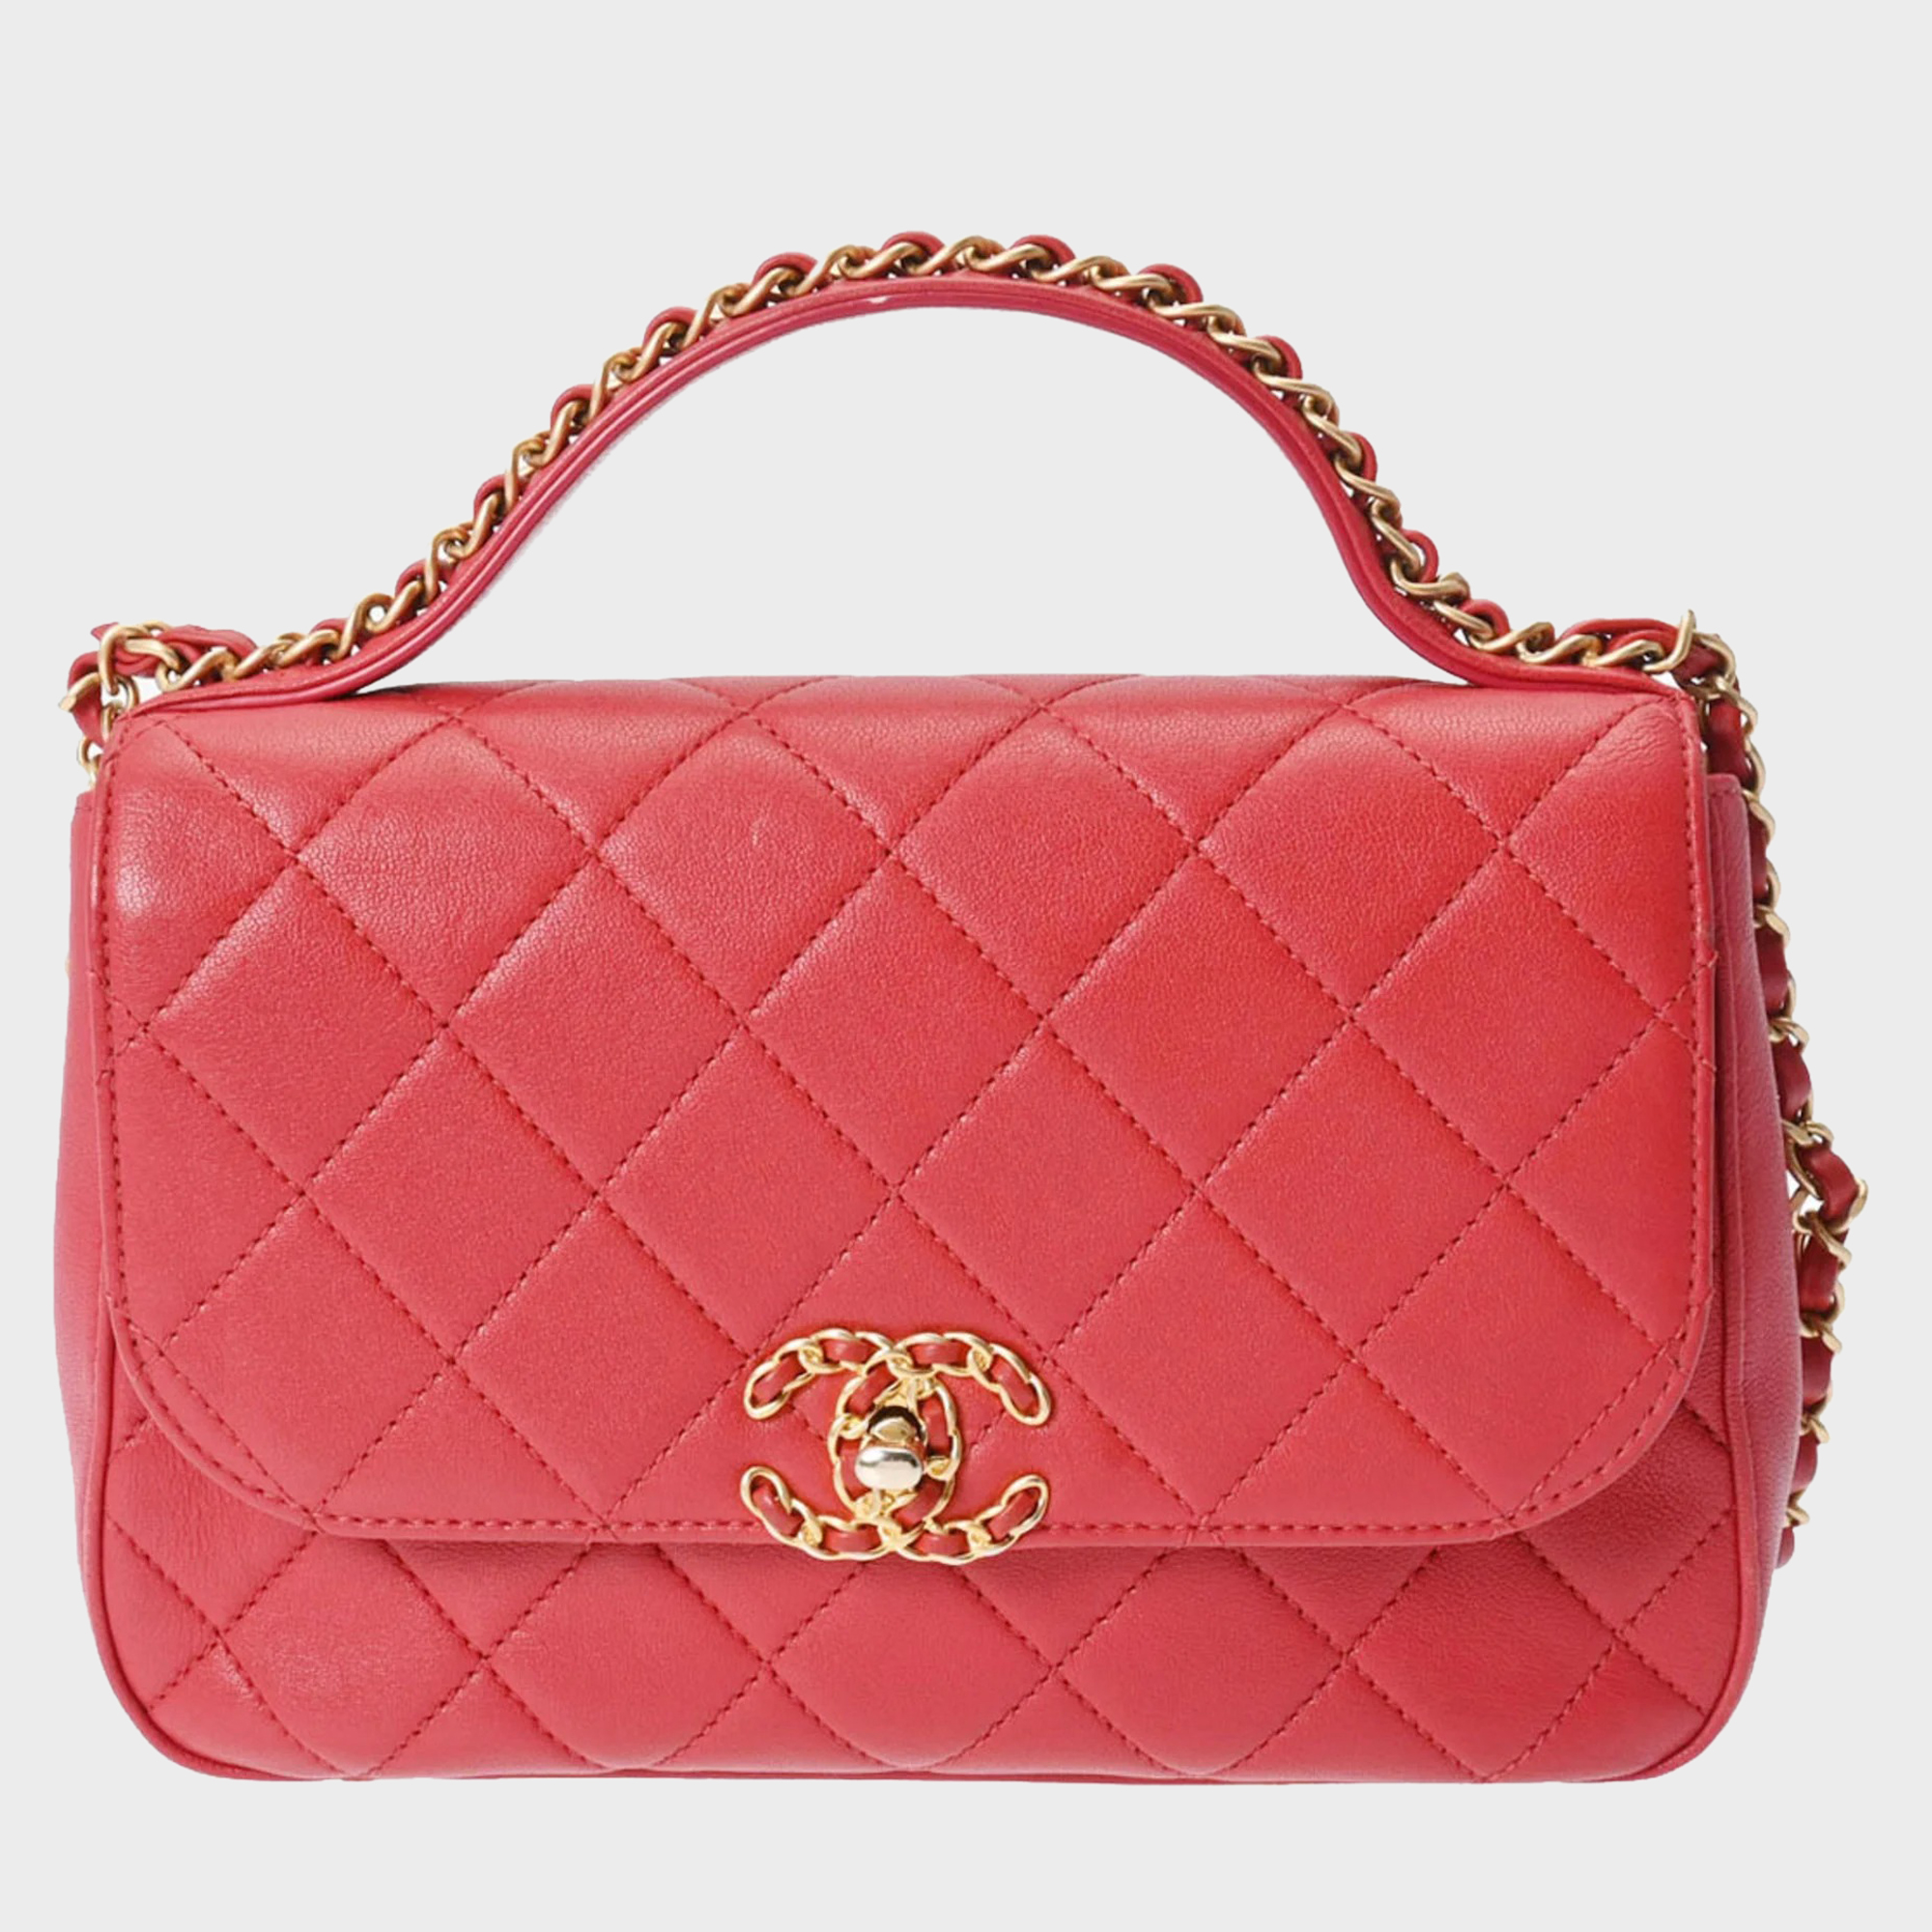 Chanel red quilted lambskin top handle bag